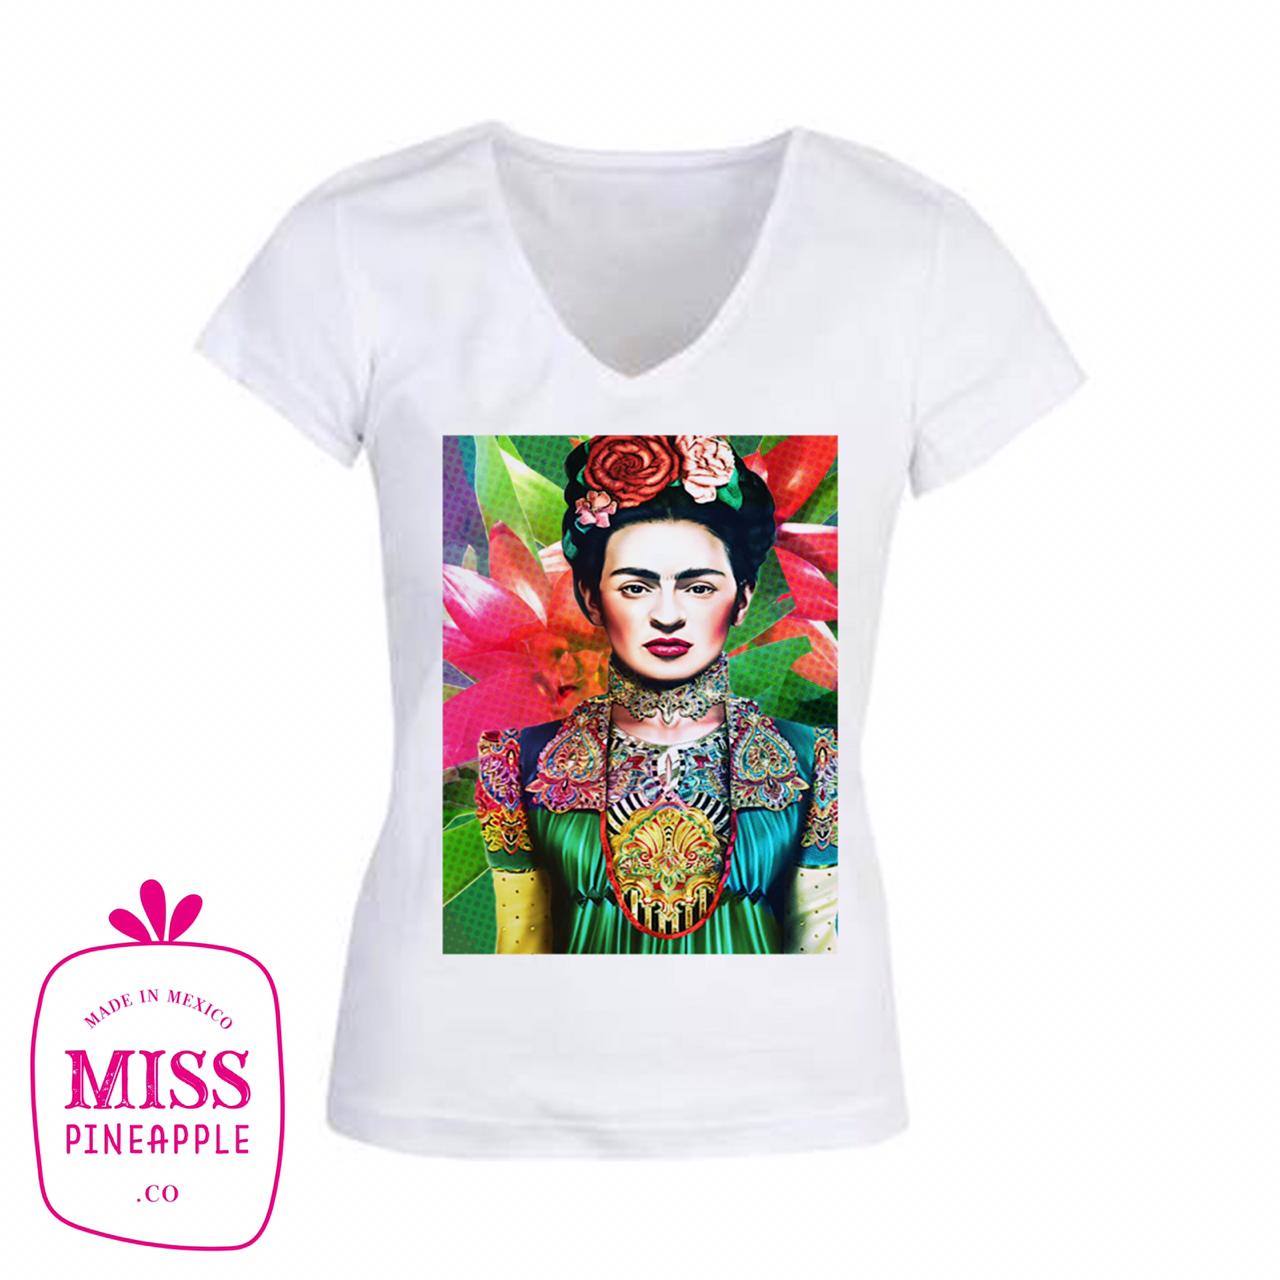 KAHLO - – Miss Women\'s Pineapple T-Shirt FRIDA Collection Co